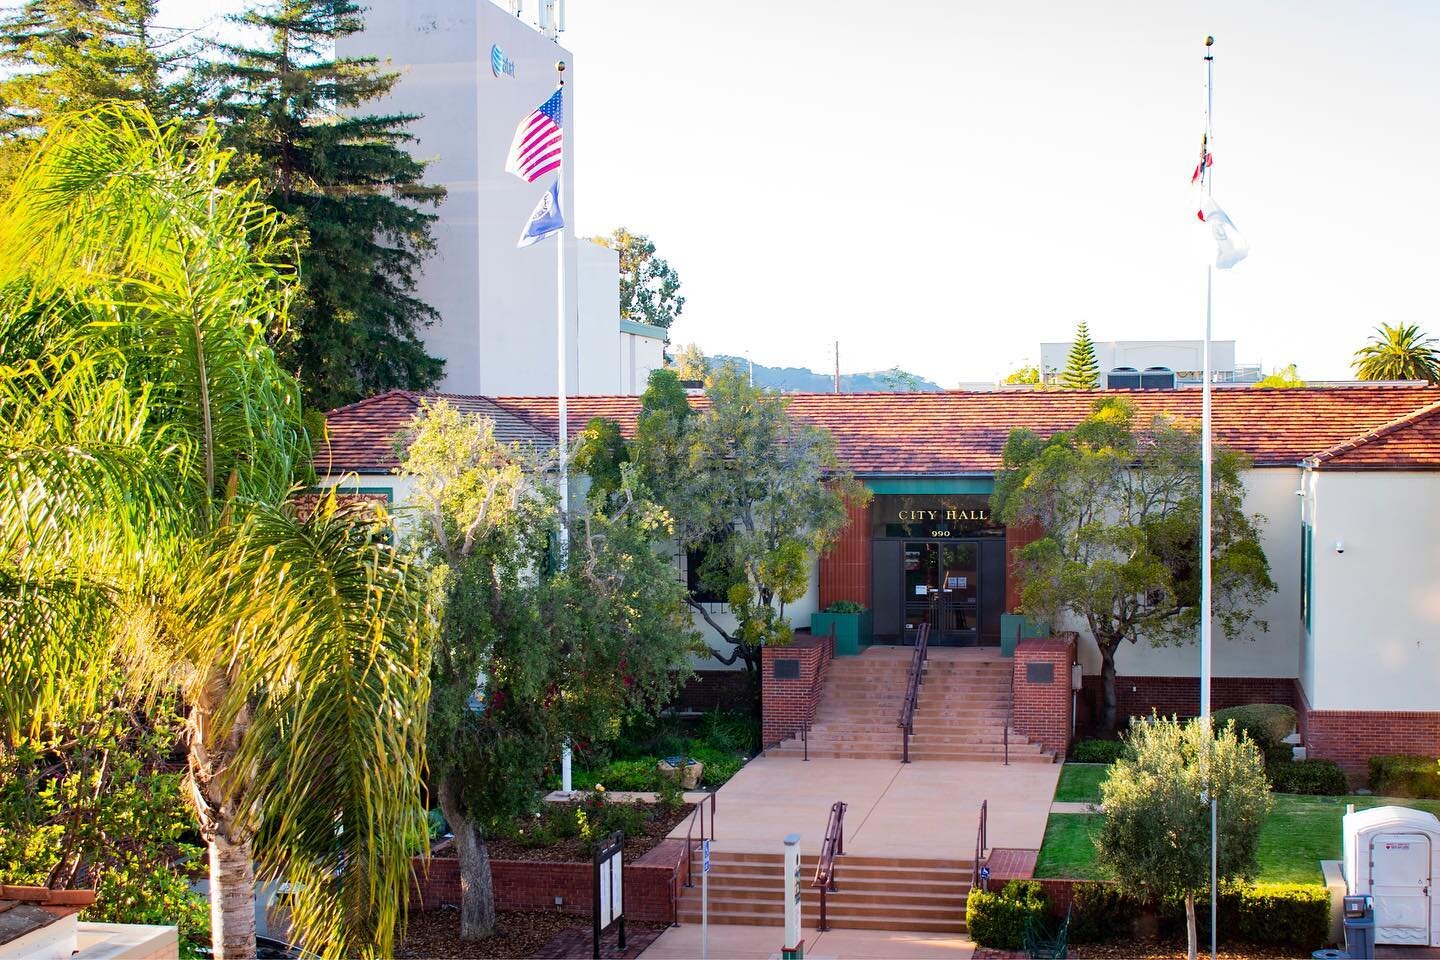 Project Highlight: SLO City Hall 🏛

3CE was tasked with replacing the old non-working controls system to an updated Johnson Controls system for SLO City Hall in Downtown SLO. The existing DDC system was no longer effective in operating the facility.